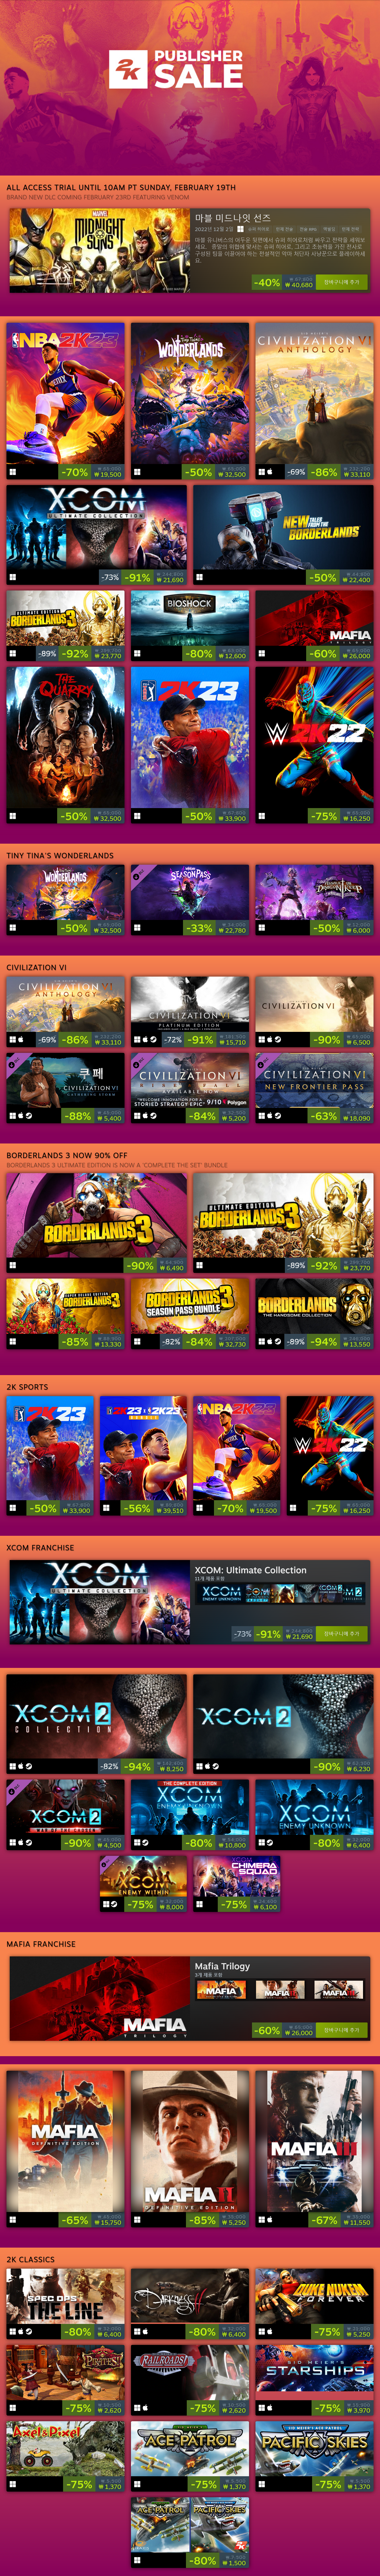 Screenshot 2023-02-17 at 13-26-44 Experience must-play games from 2K at great prices.png